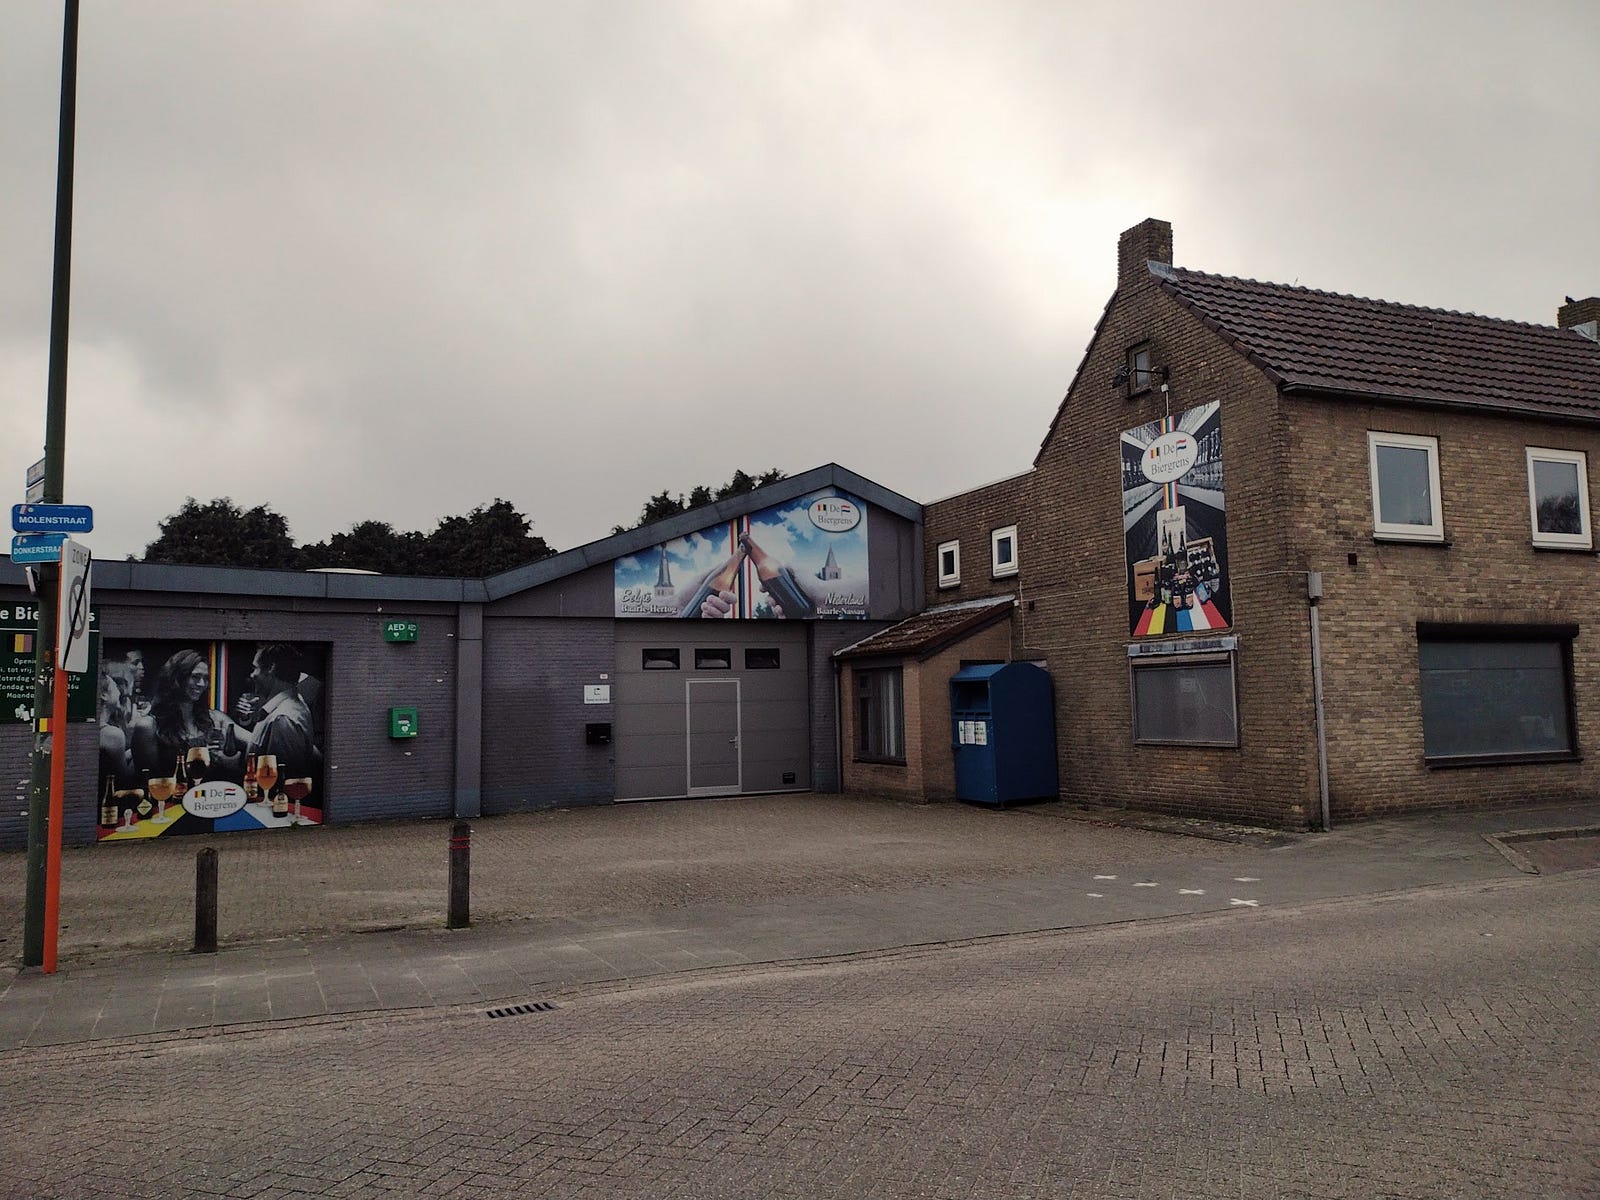 A beer store and parking lot with a mural showing Dutch and Belgian beers meeting